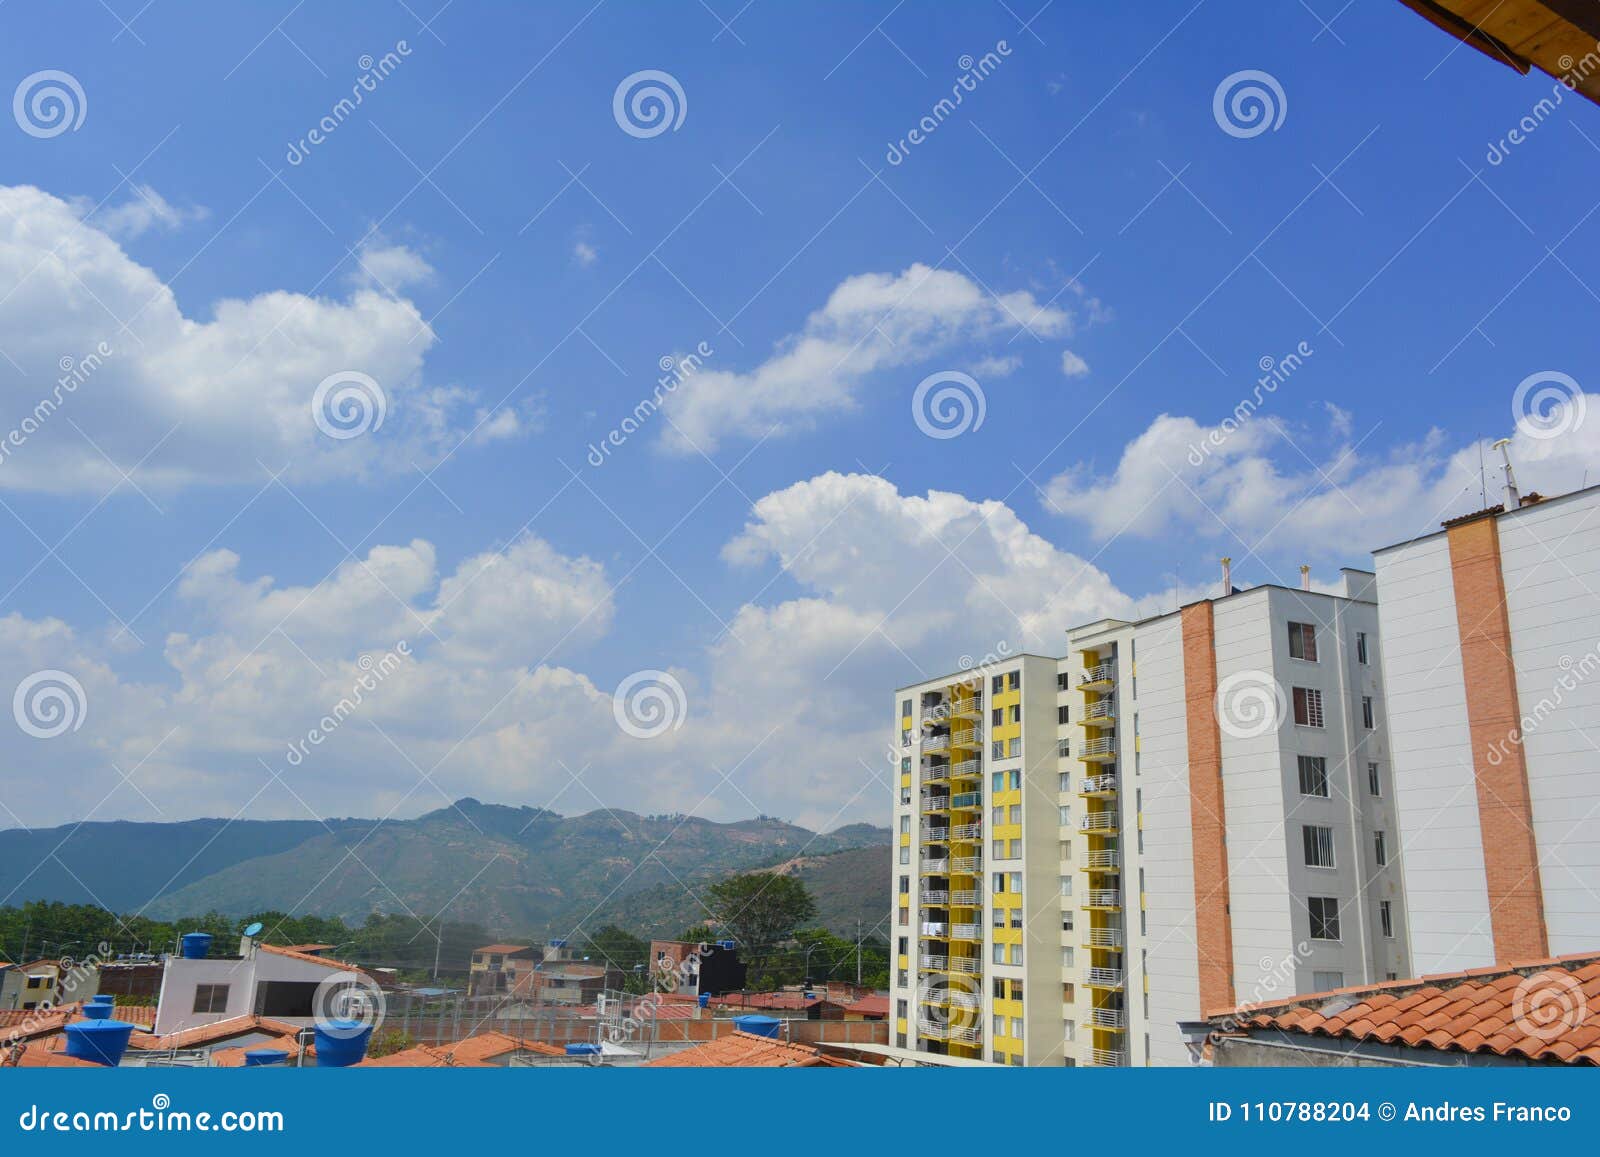 a landscape of some houses seen from the roof and yellow building wall with a blue sky in the background